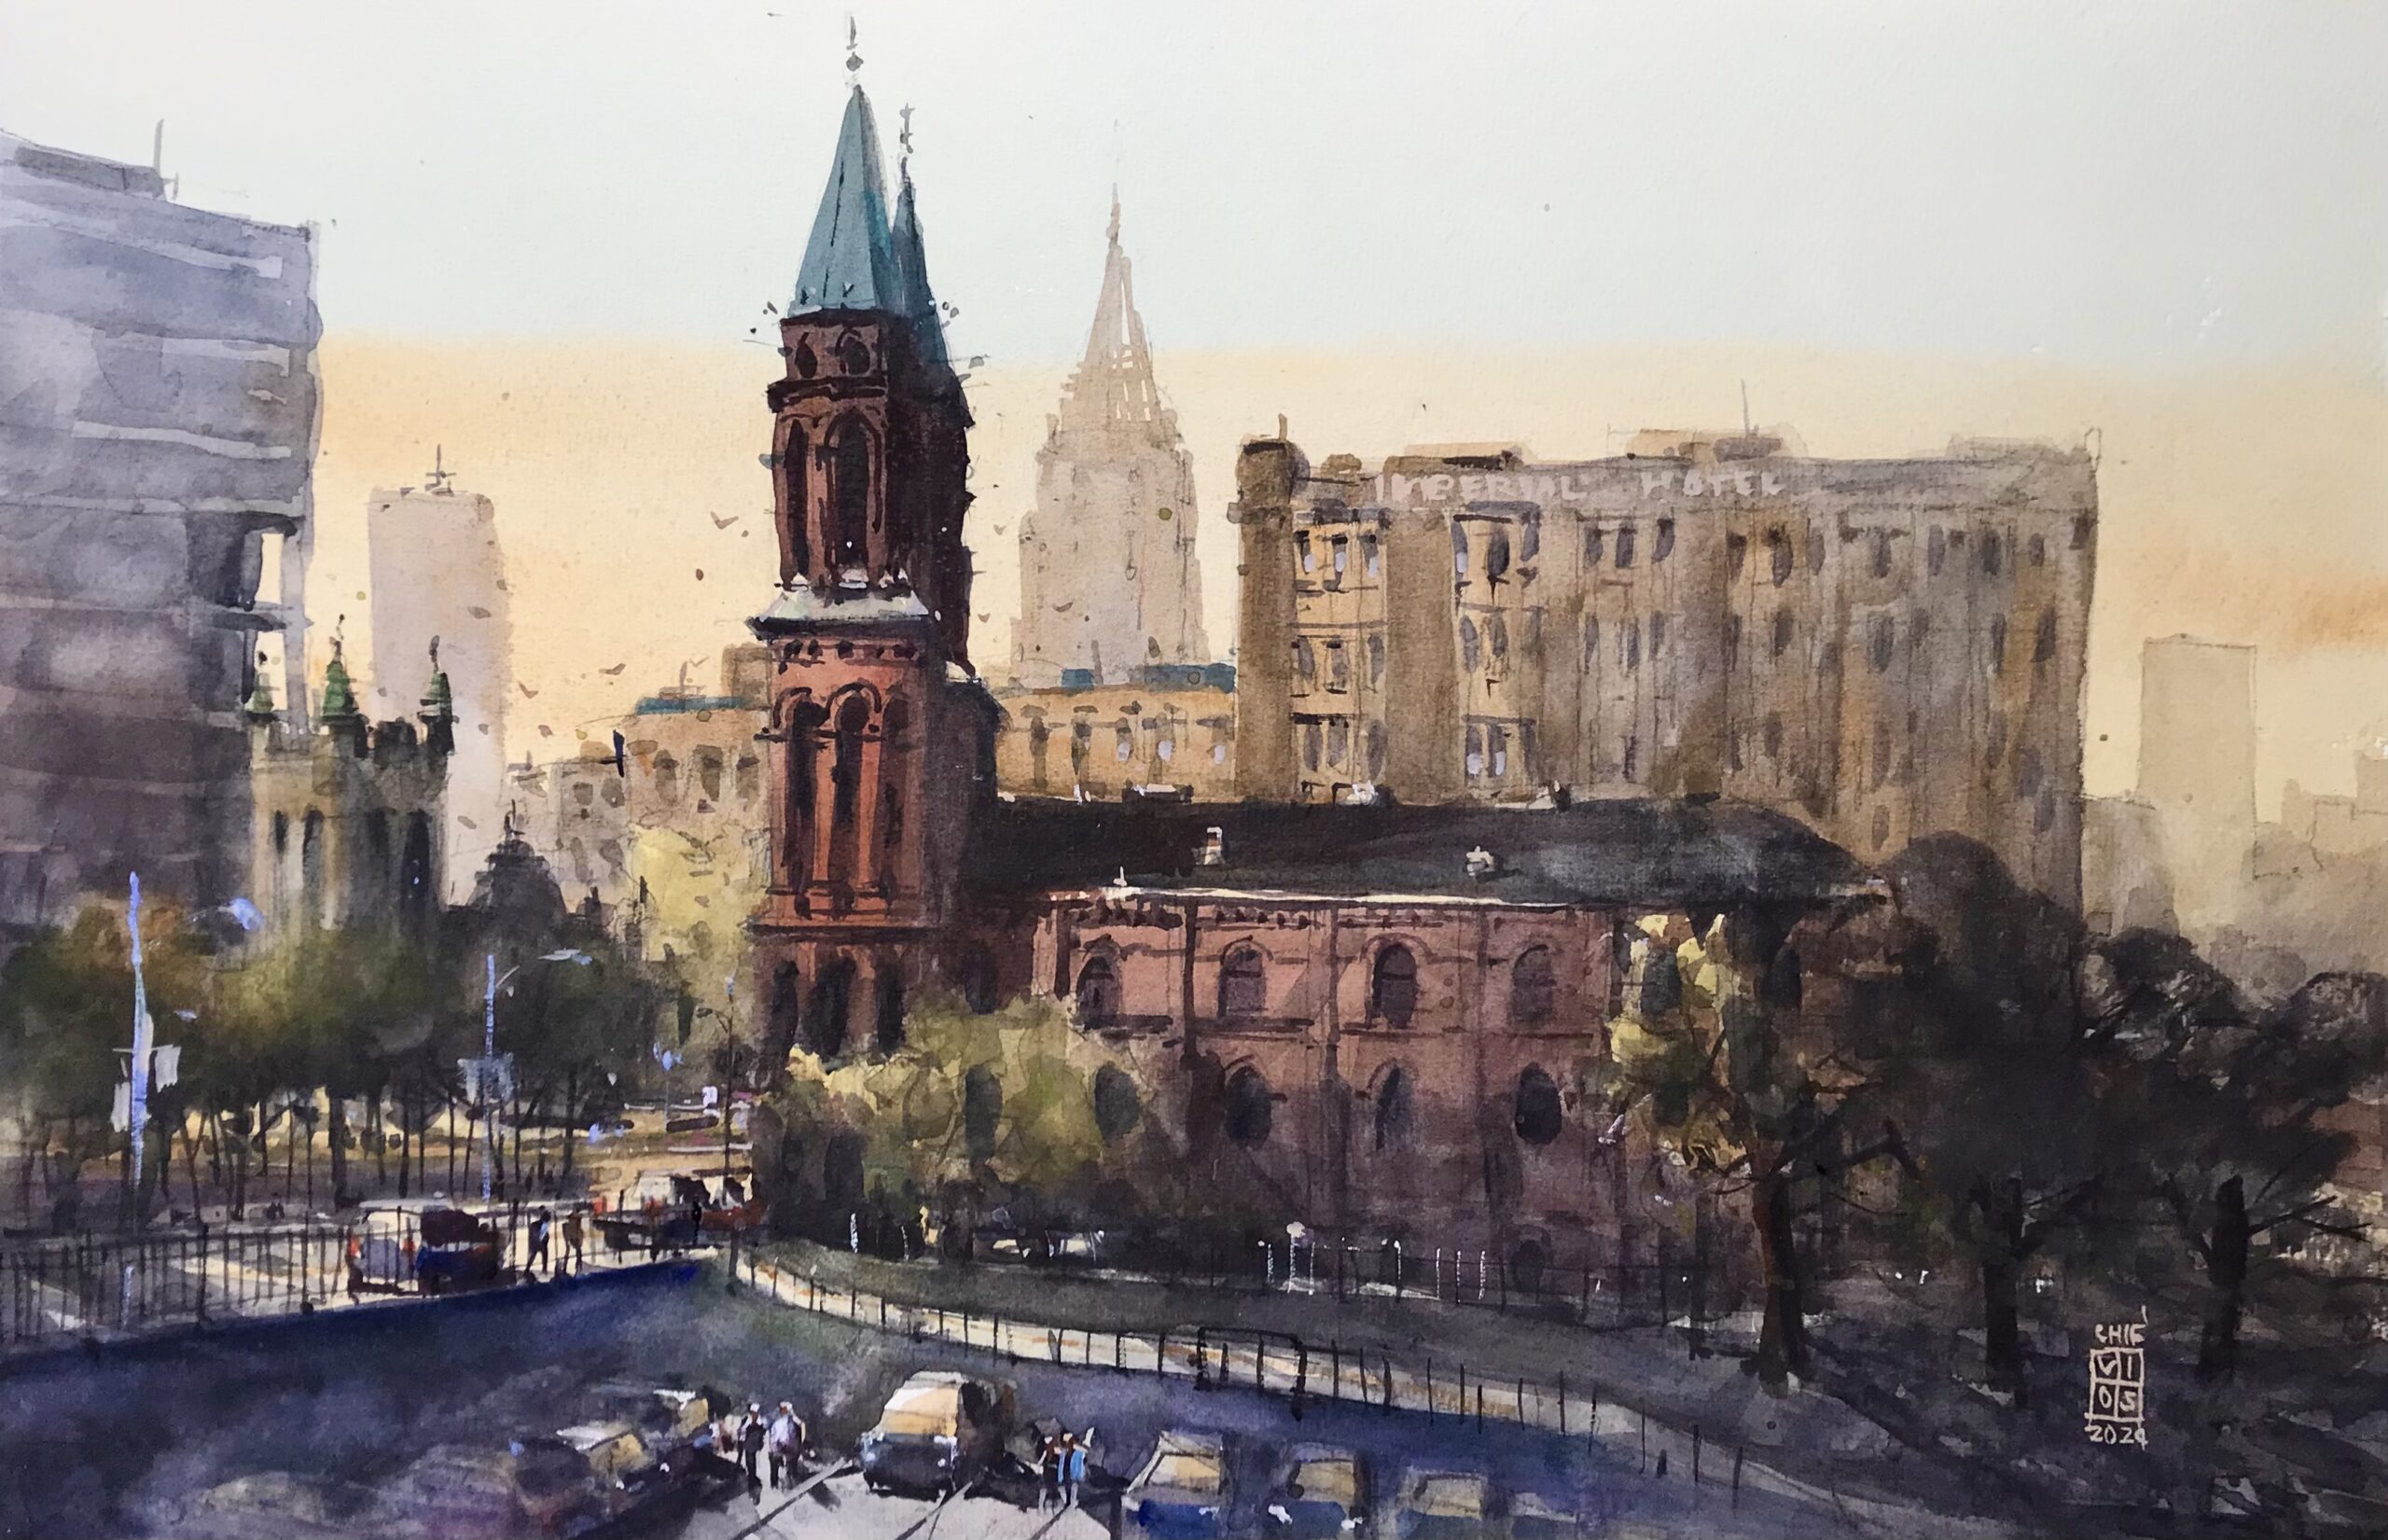 Best Architecture award: "Blessed Atlanta" by Richie Vios, 16x22 in., Watercolor on Watercolor Paper